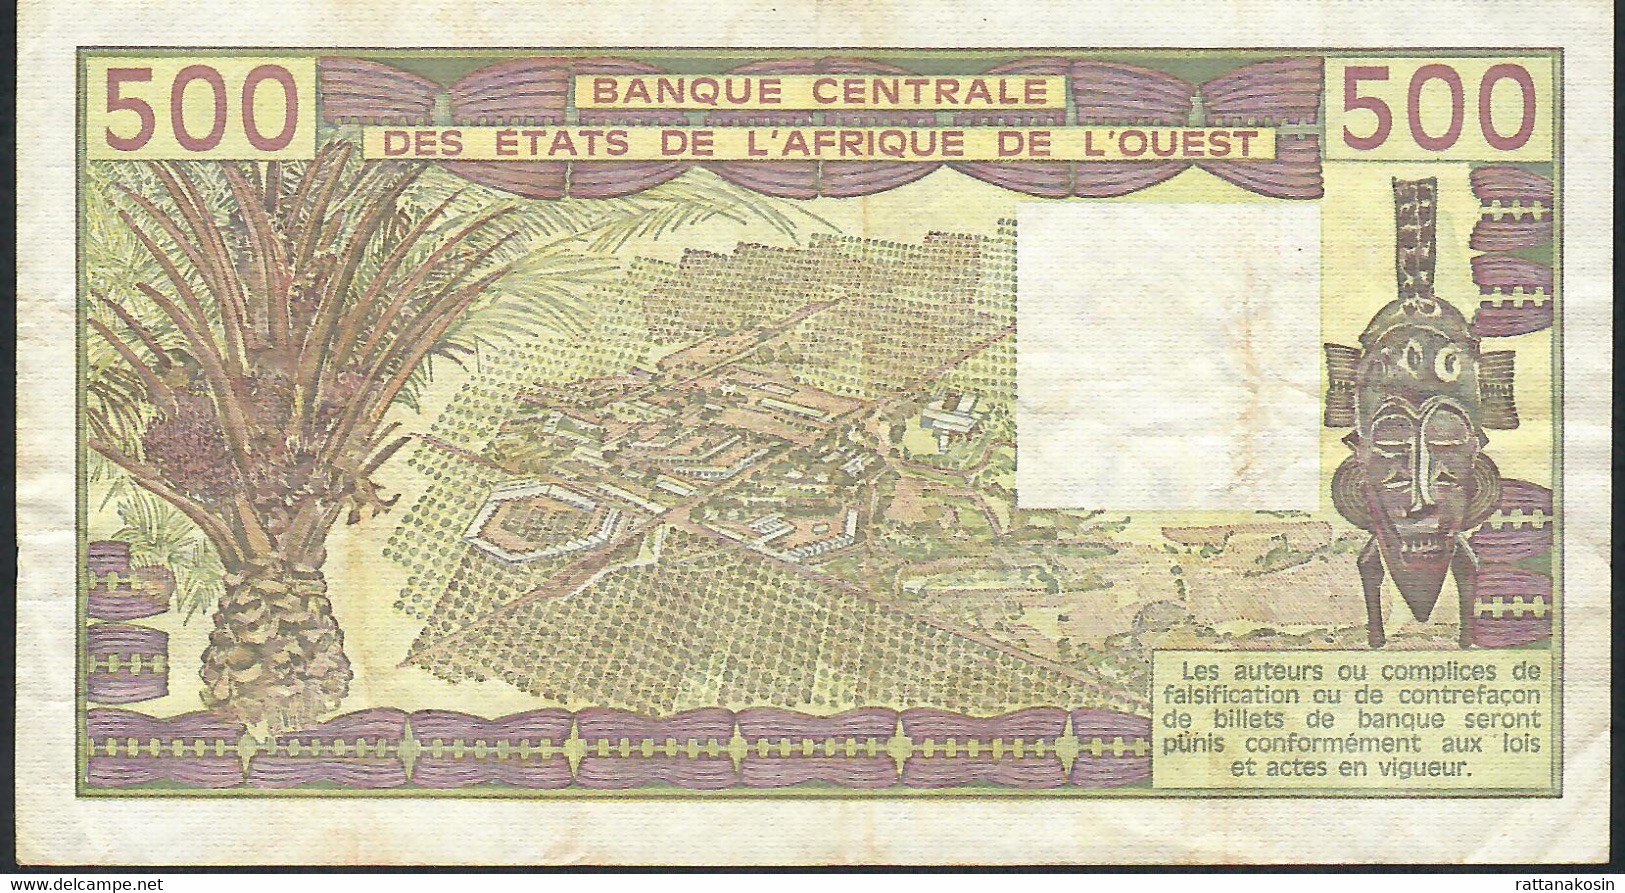 W.A.S.  NIGER  RARE ERROR NOTE P606Hb2 500 FRANCS 1981  Signature 15 VF    NO P.h. - West African States